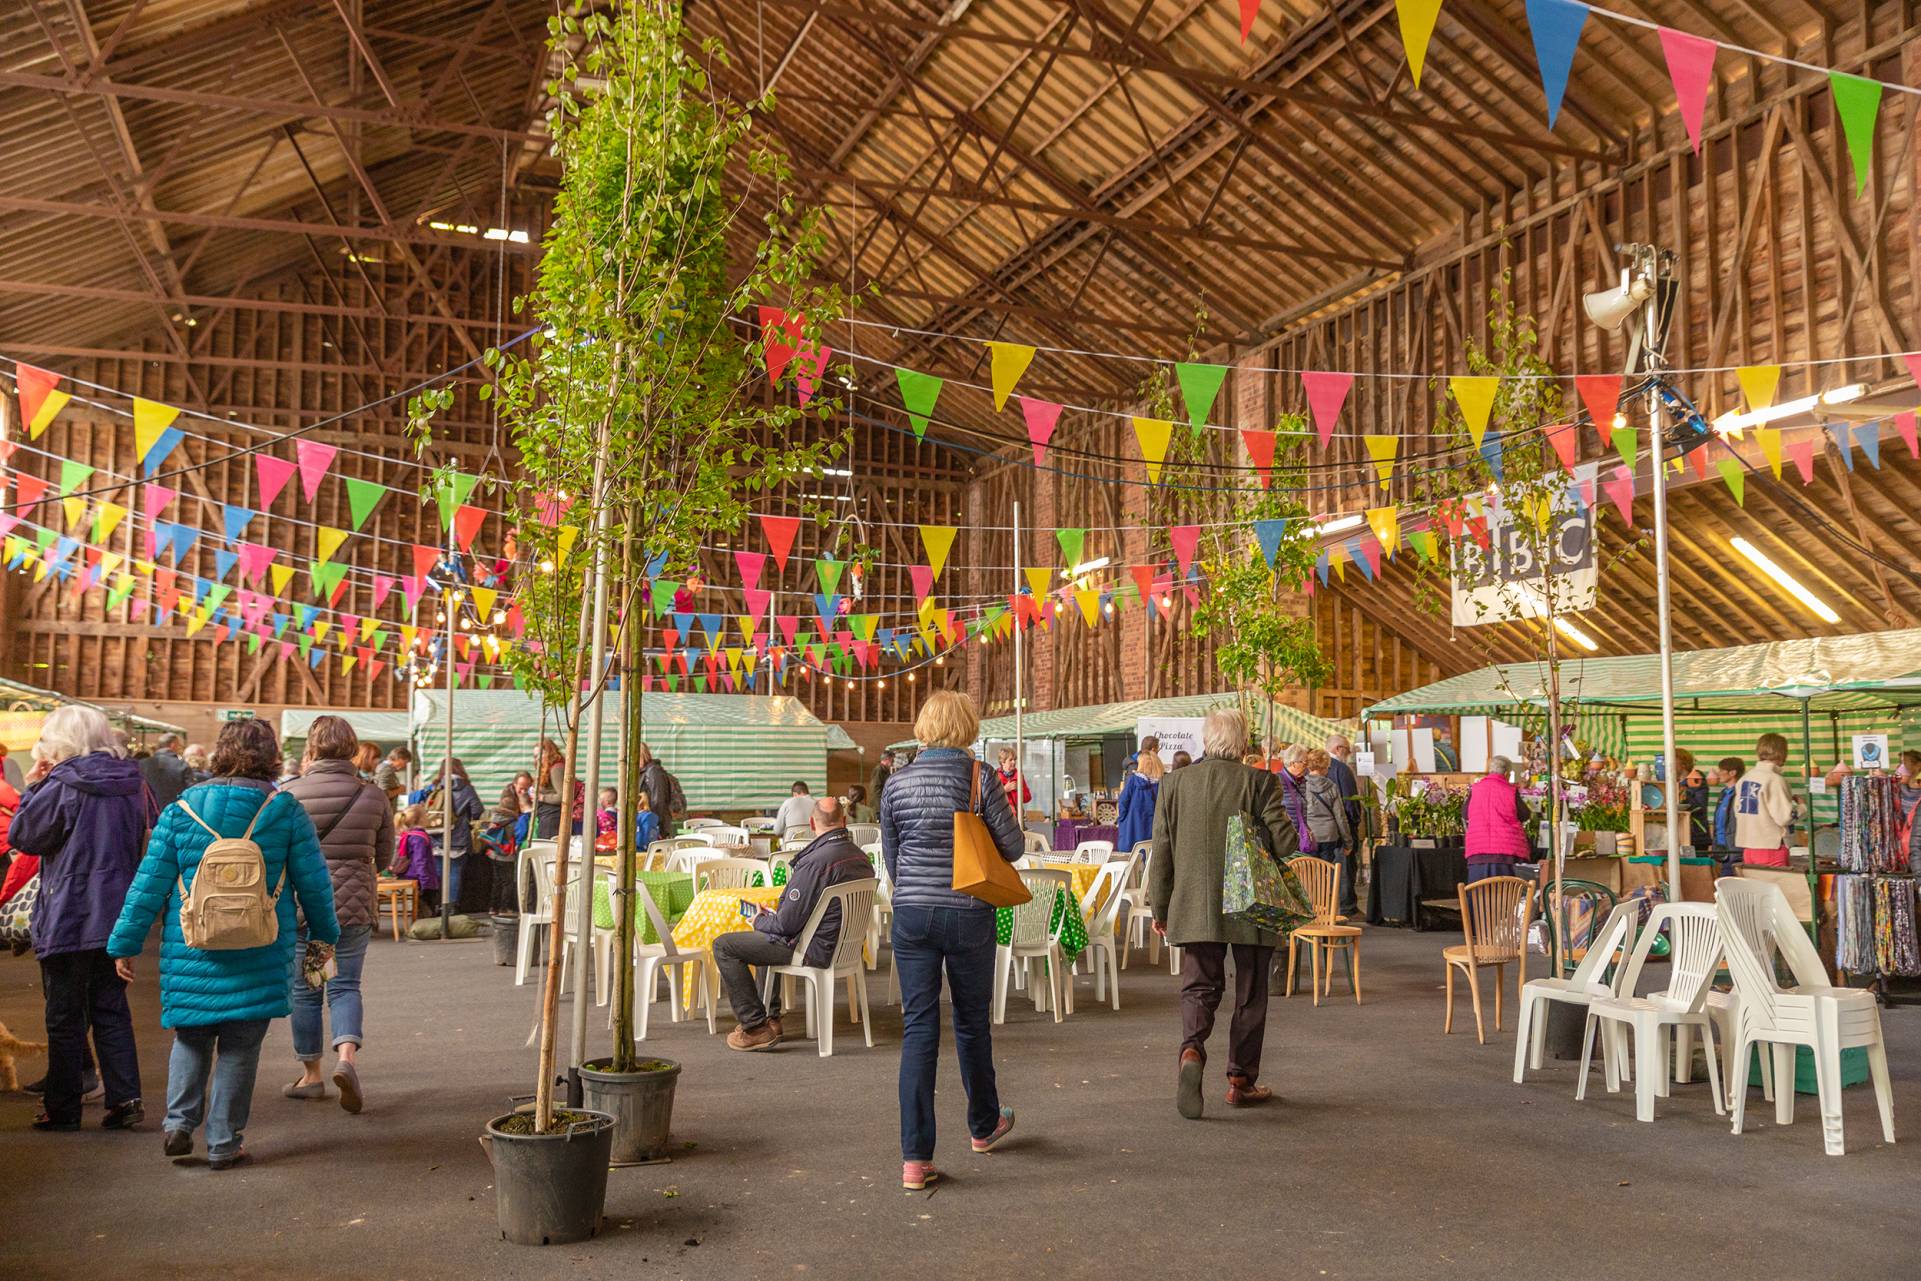 Festival atmosphere with bunting in the barn